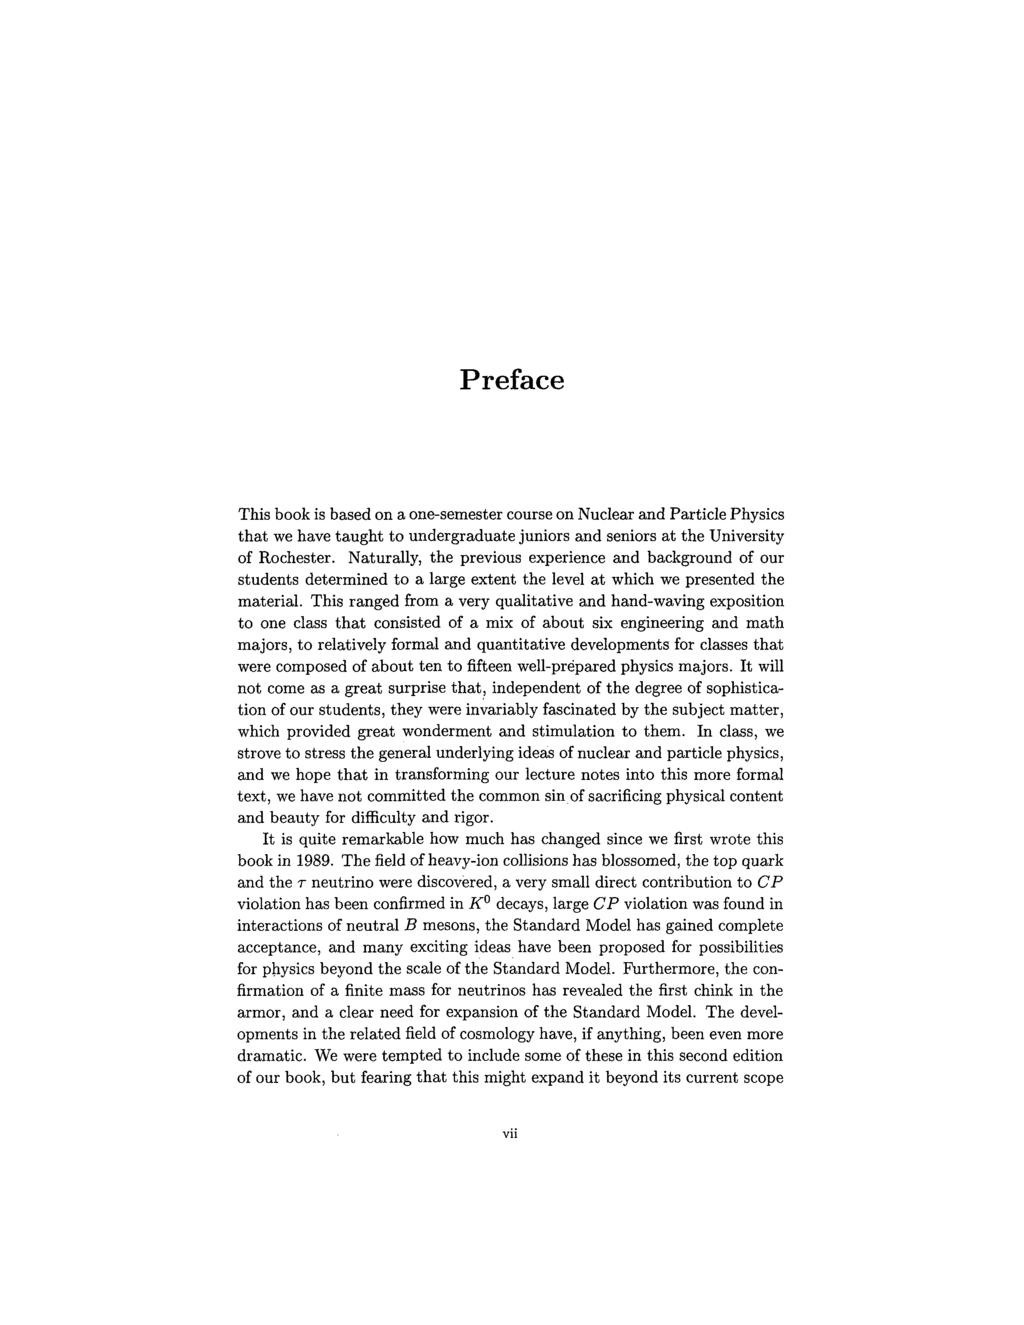 Preface This book is based on a one-semester course on Nuclear and Particle Physics that we have taught to undergraduate juniors and seniors at the University of Rochester.